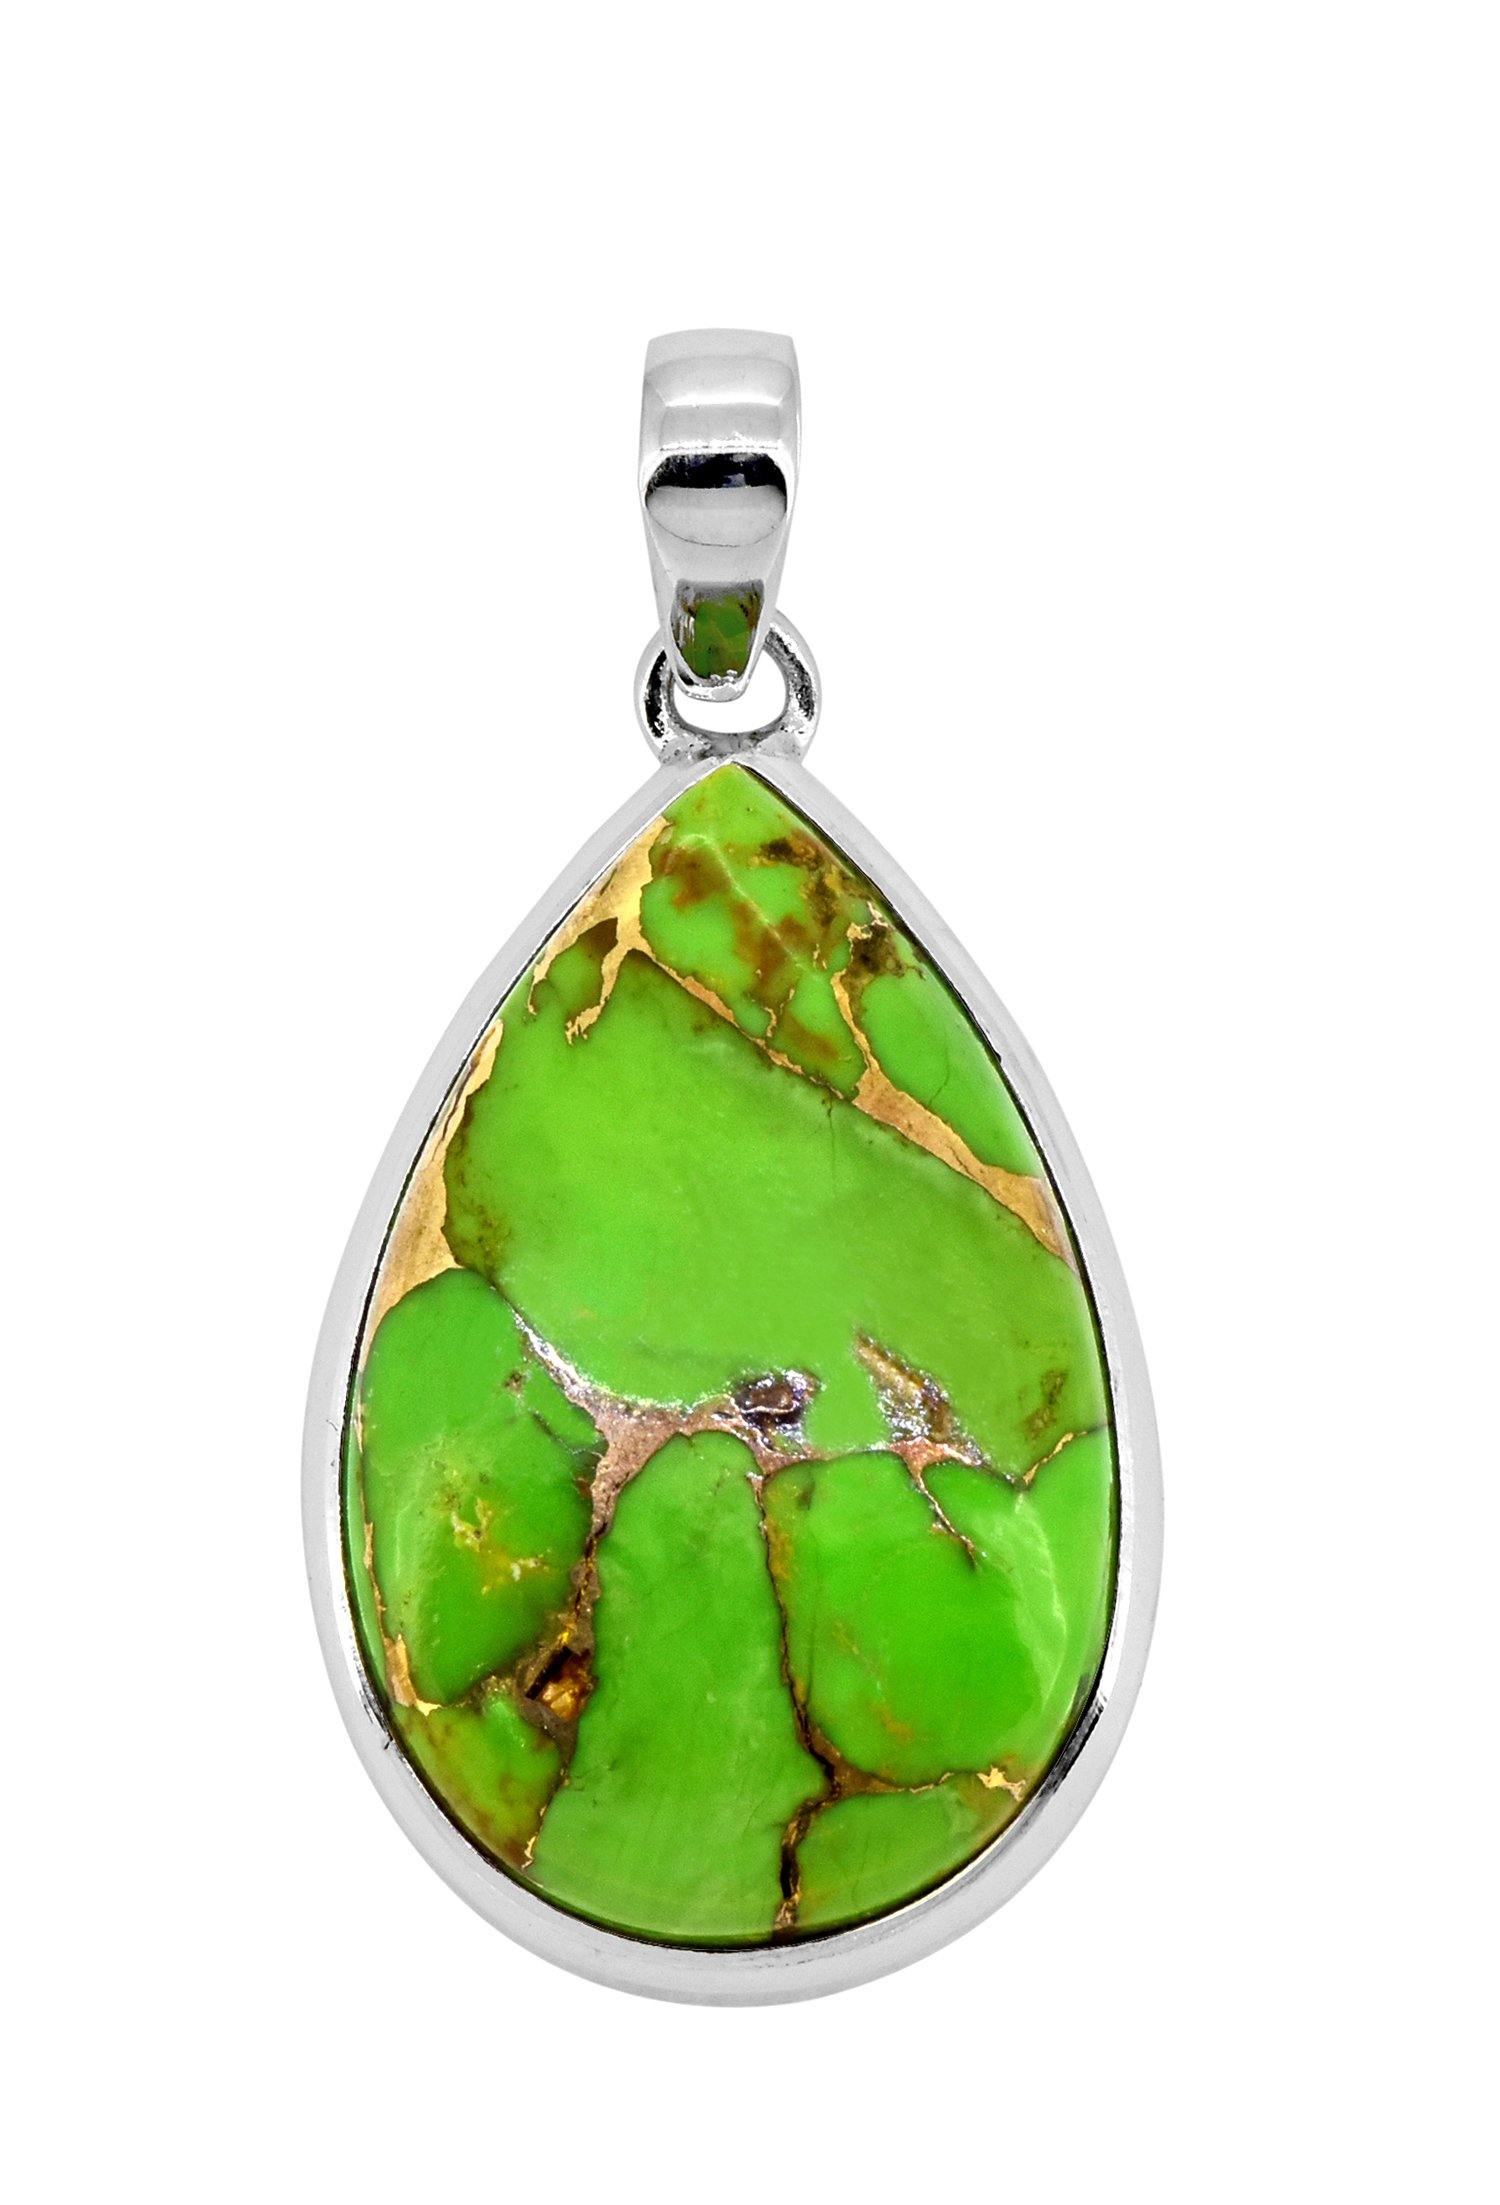 Green Copper Turquoise Solid 925 Sterling Silver Chain Pendant Jewelry - YoTreasure